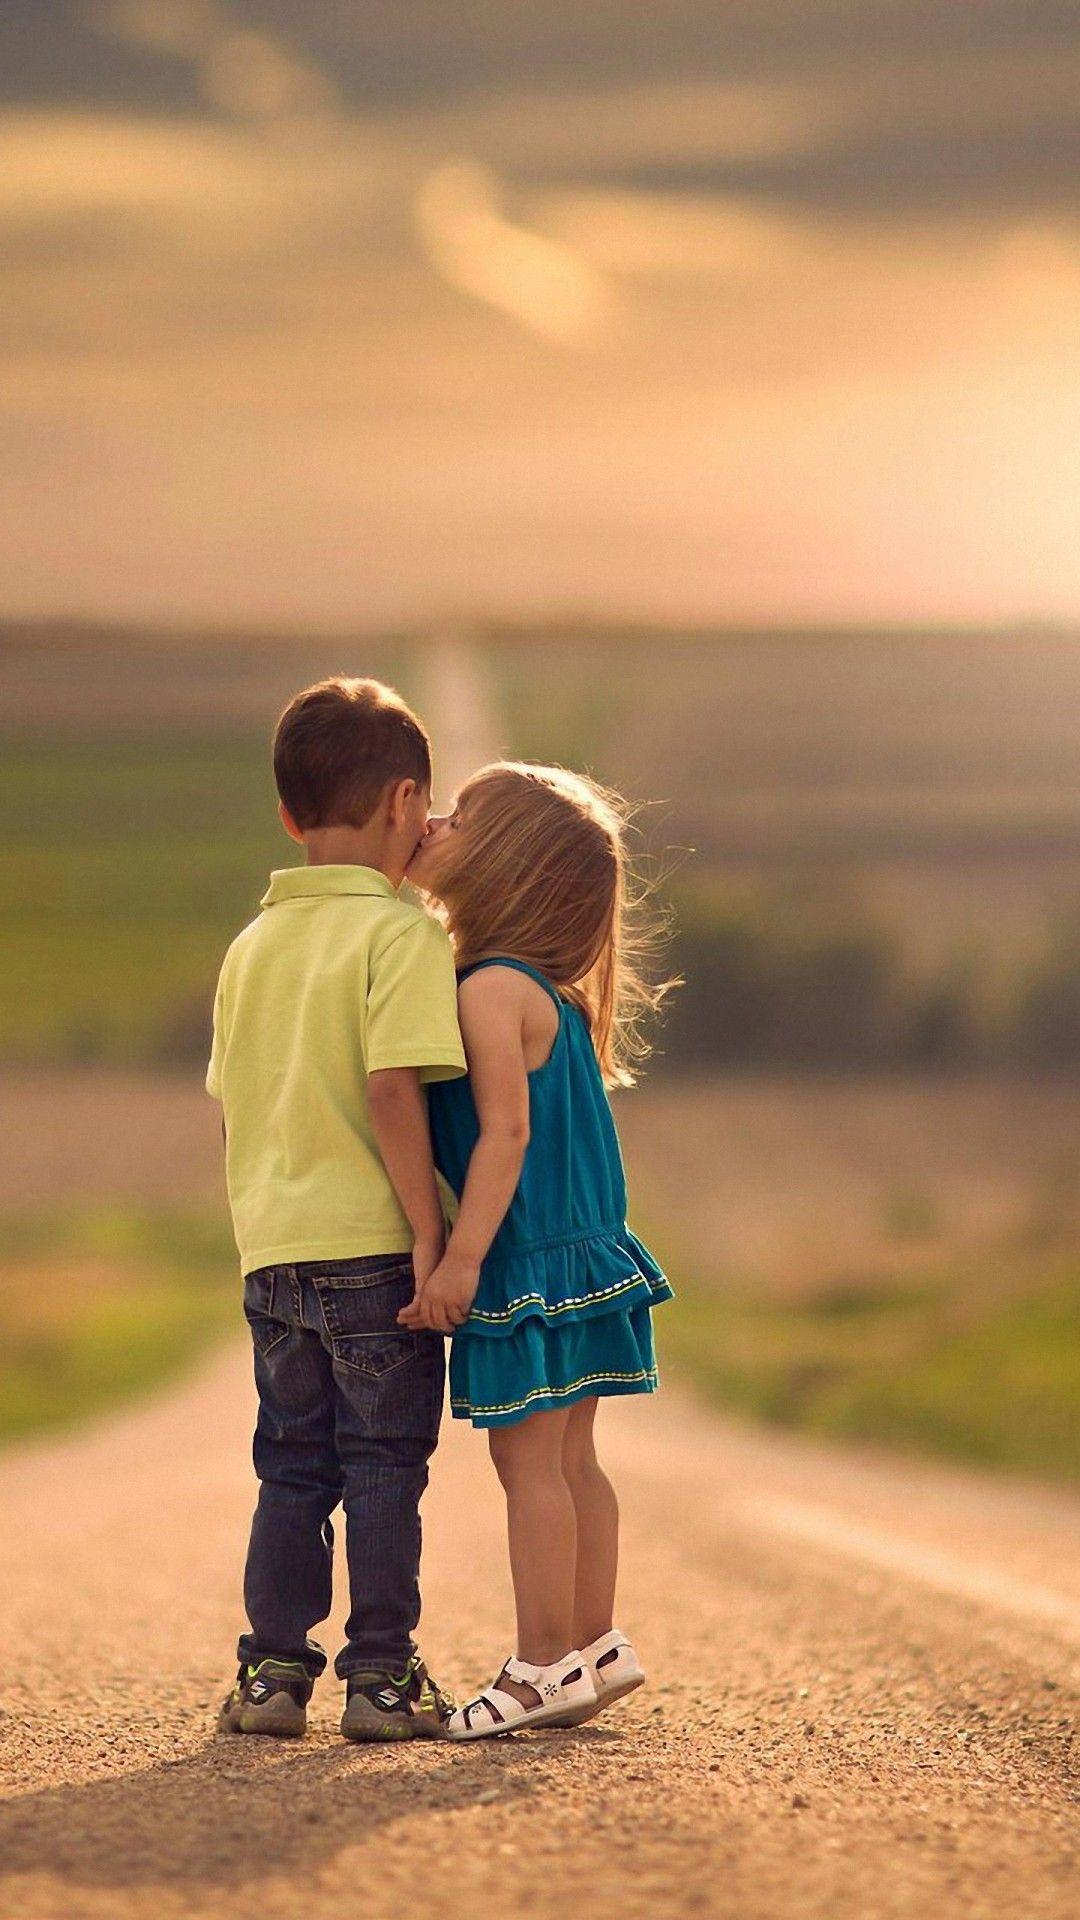 Cute Kid Couple Toy 4k Wallpaper, HD Artist 4K Wallpapers, Images and  Background - Wallpapers Den